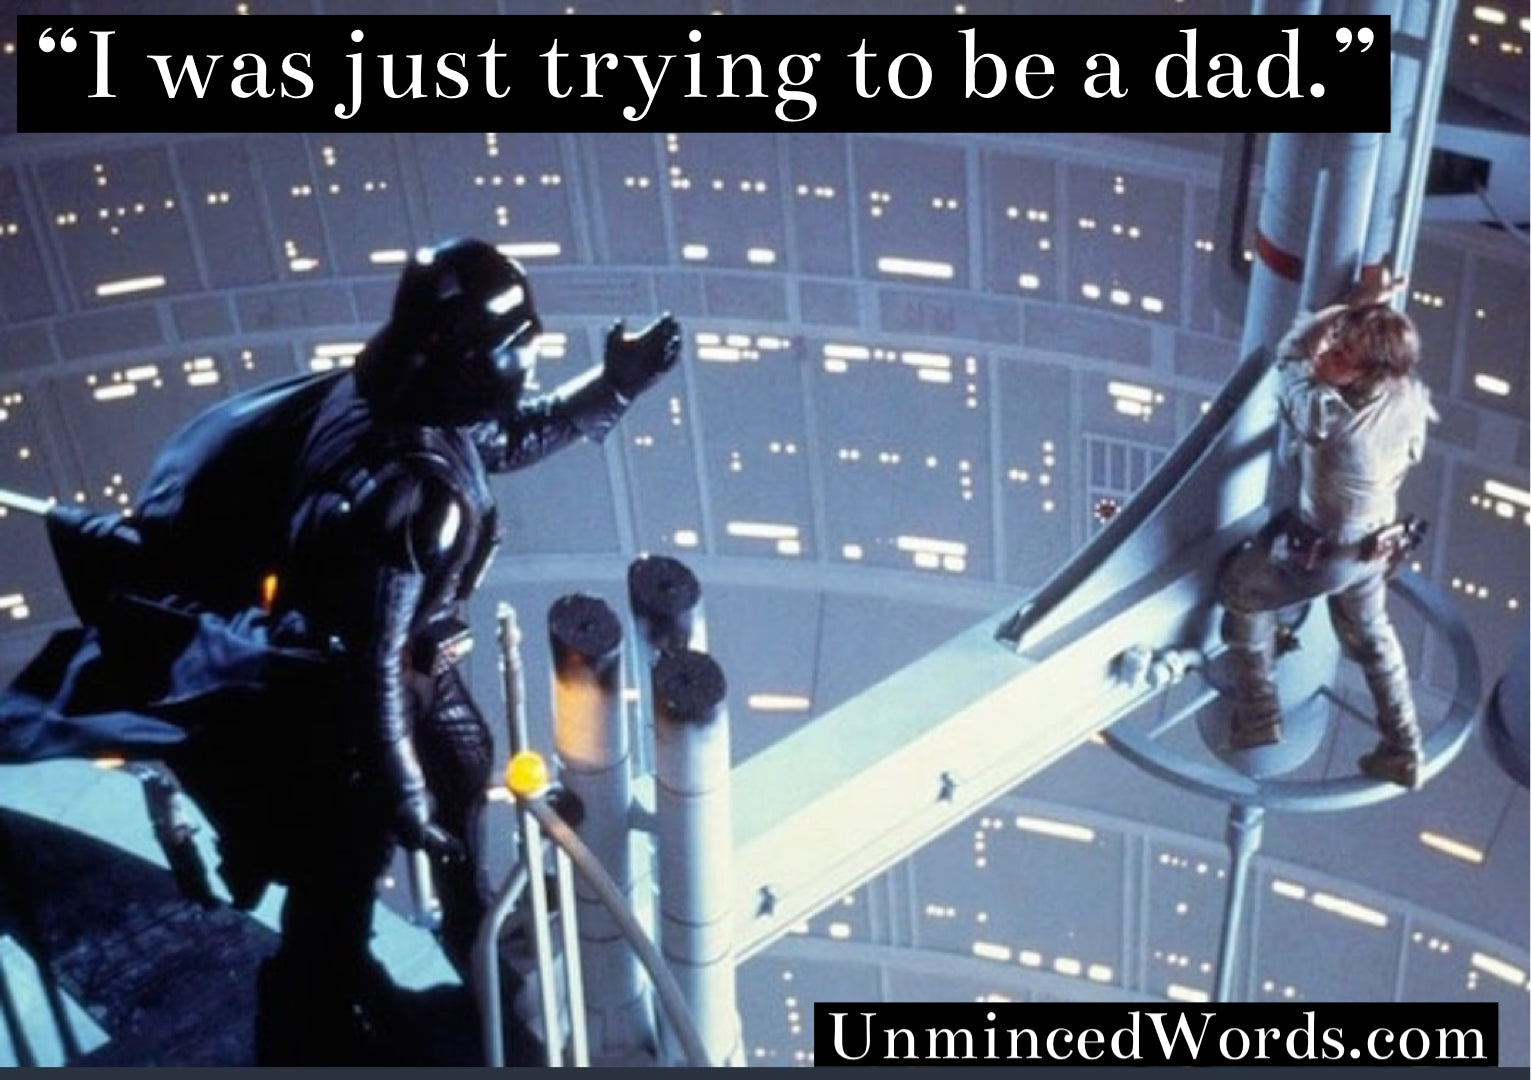 “I was just trying to be a dad.”